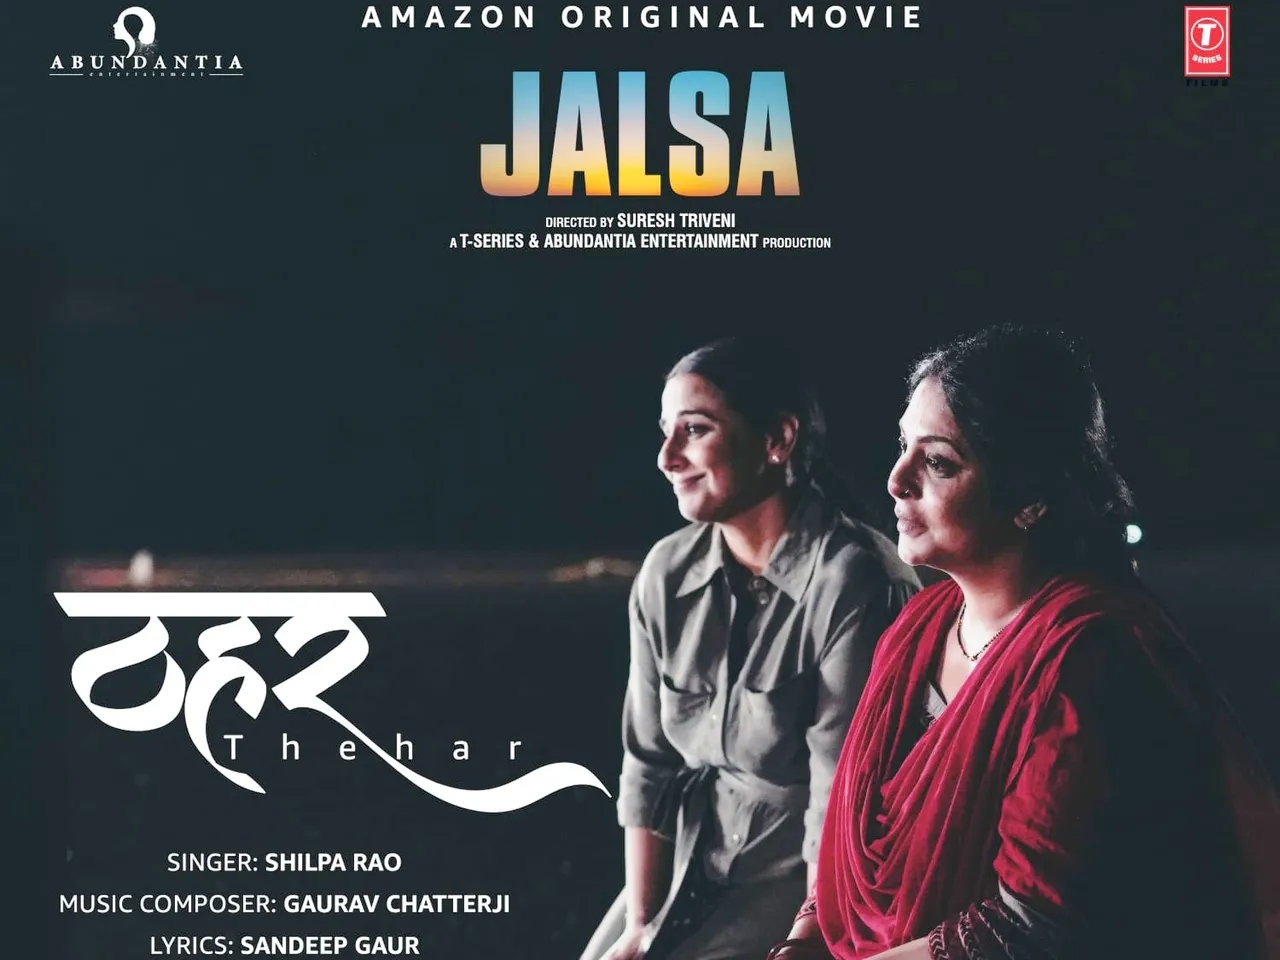 The makers of ‘Jalsa’ launch the soulful and hard-hitting track ‘Thehar’!